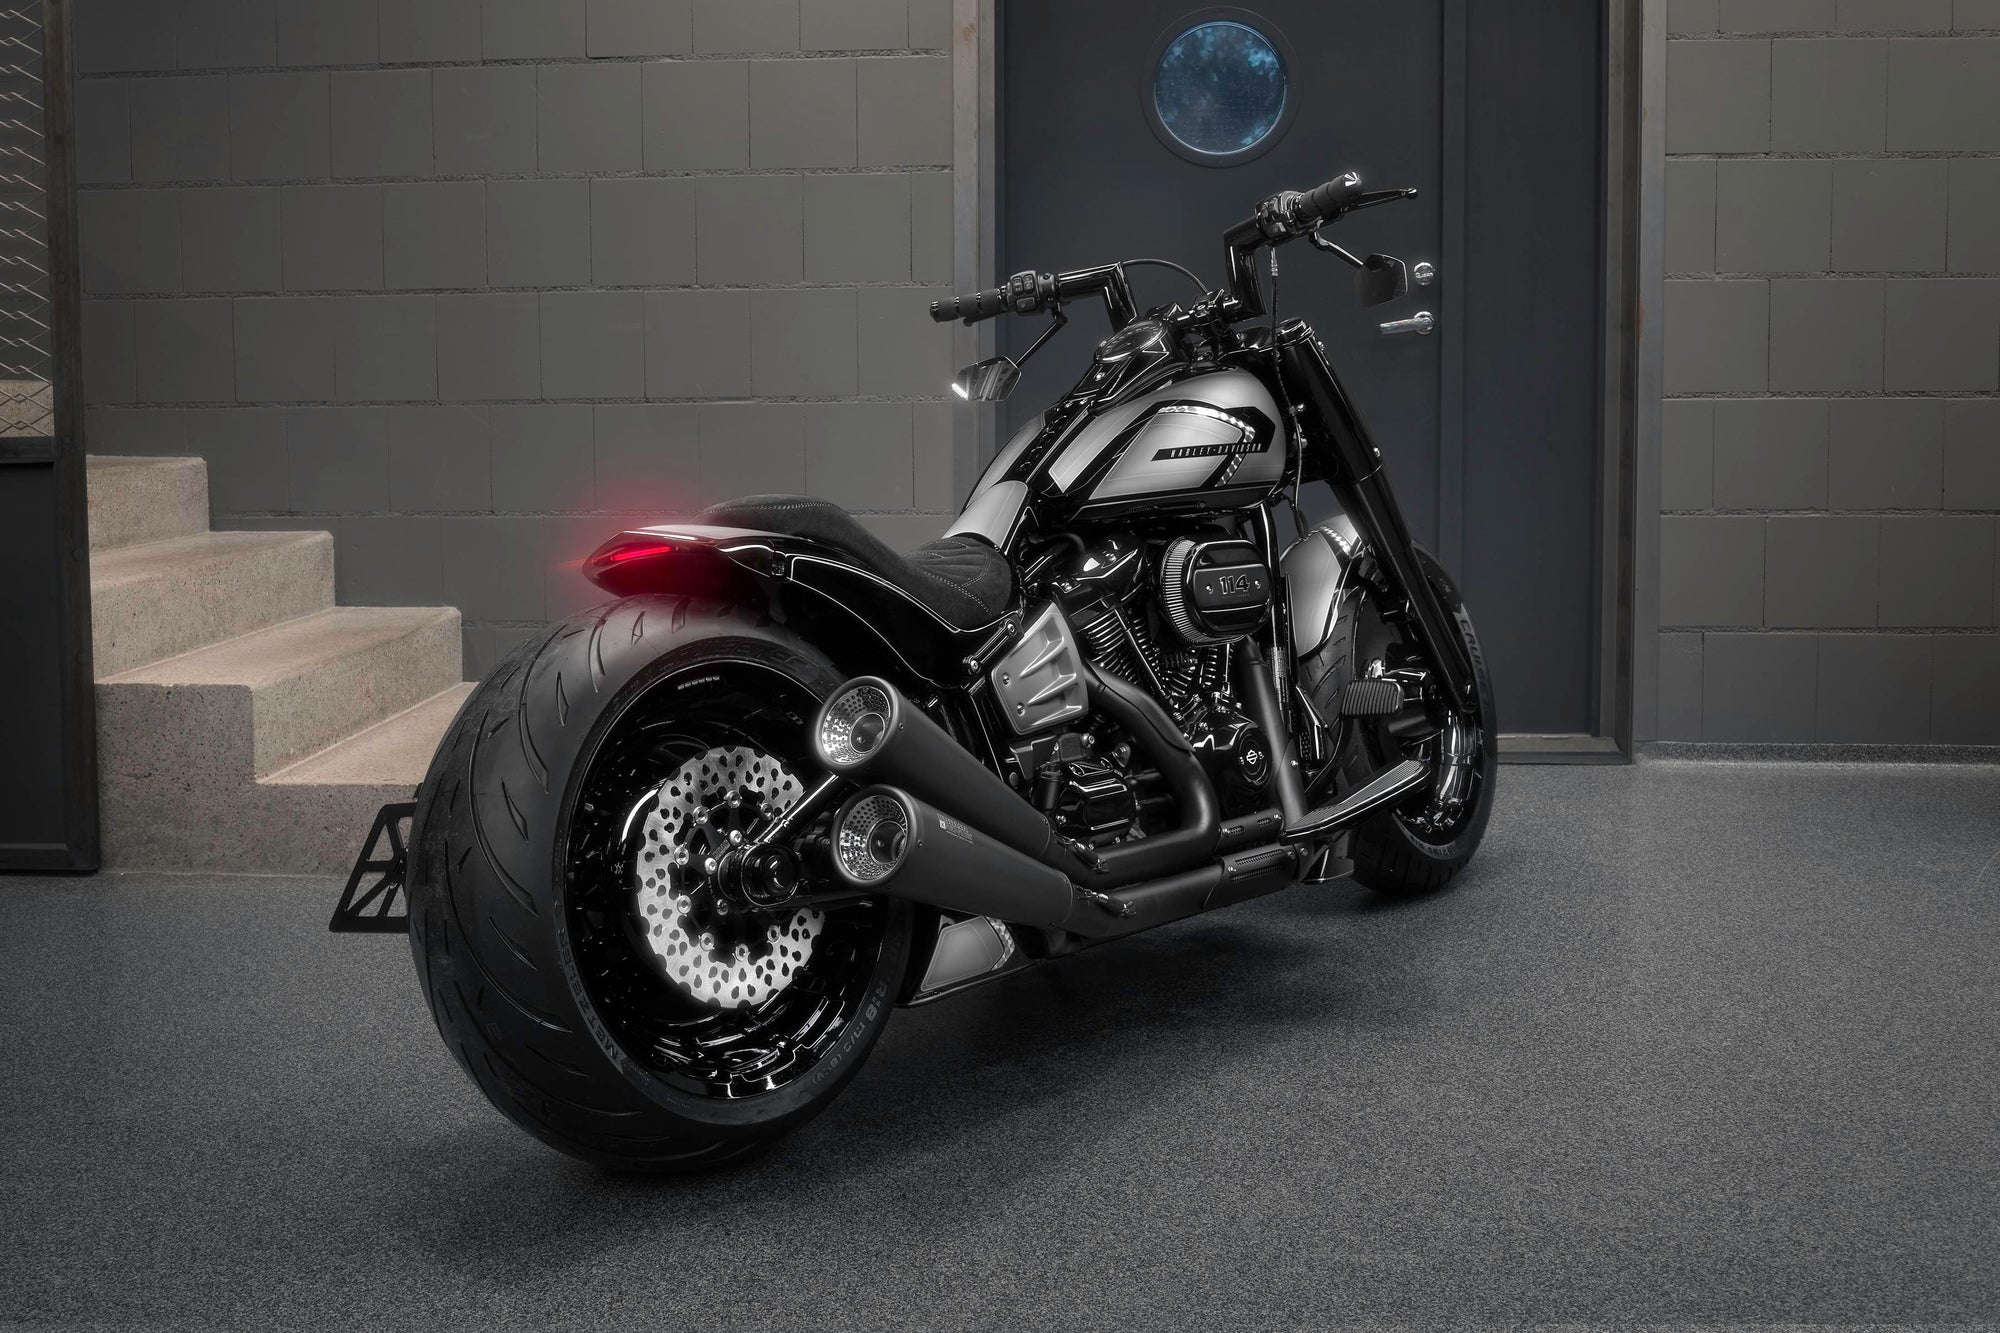 Modified Harley Davidson Softail Fat Boy motorcycle with Killer Custom parts from the rear in a modern bike shop